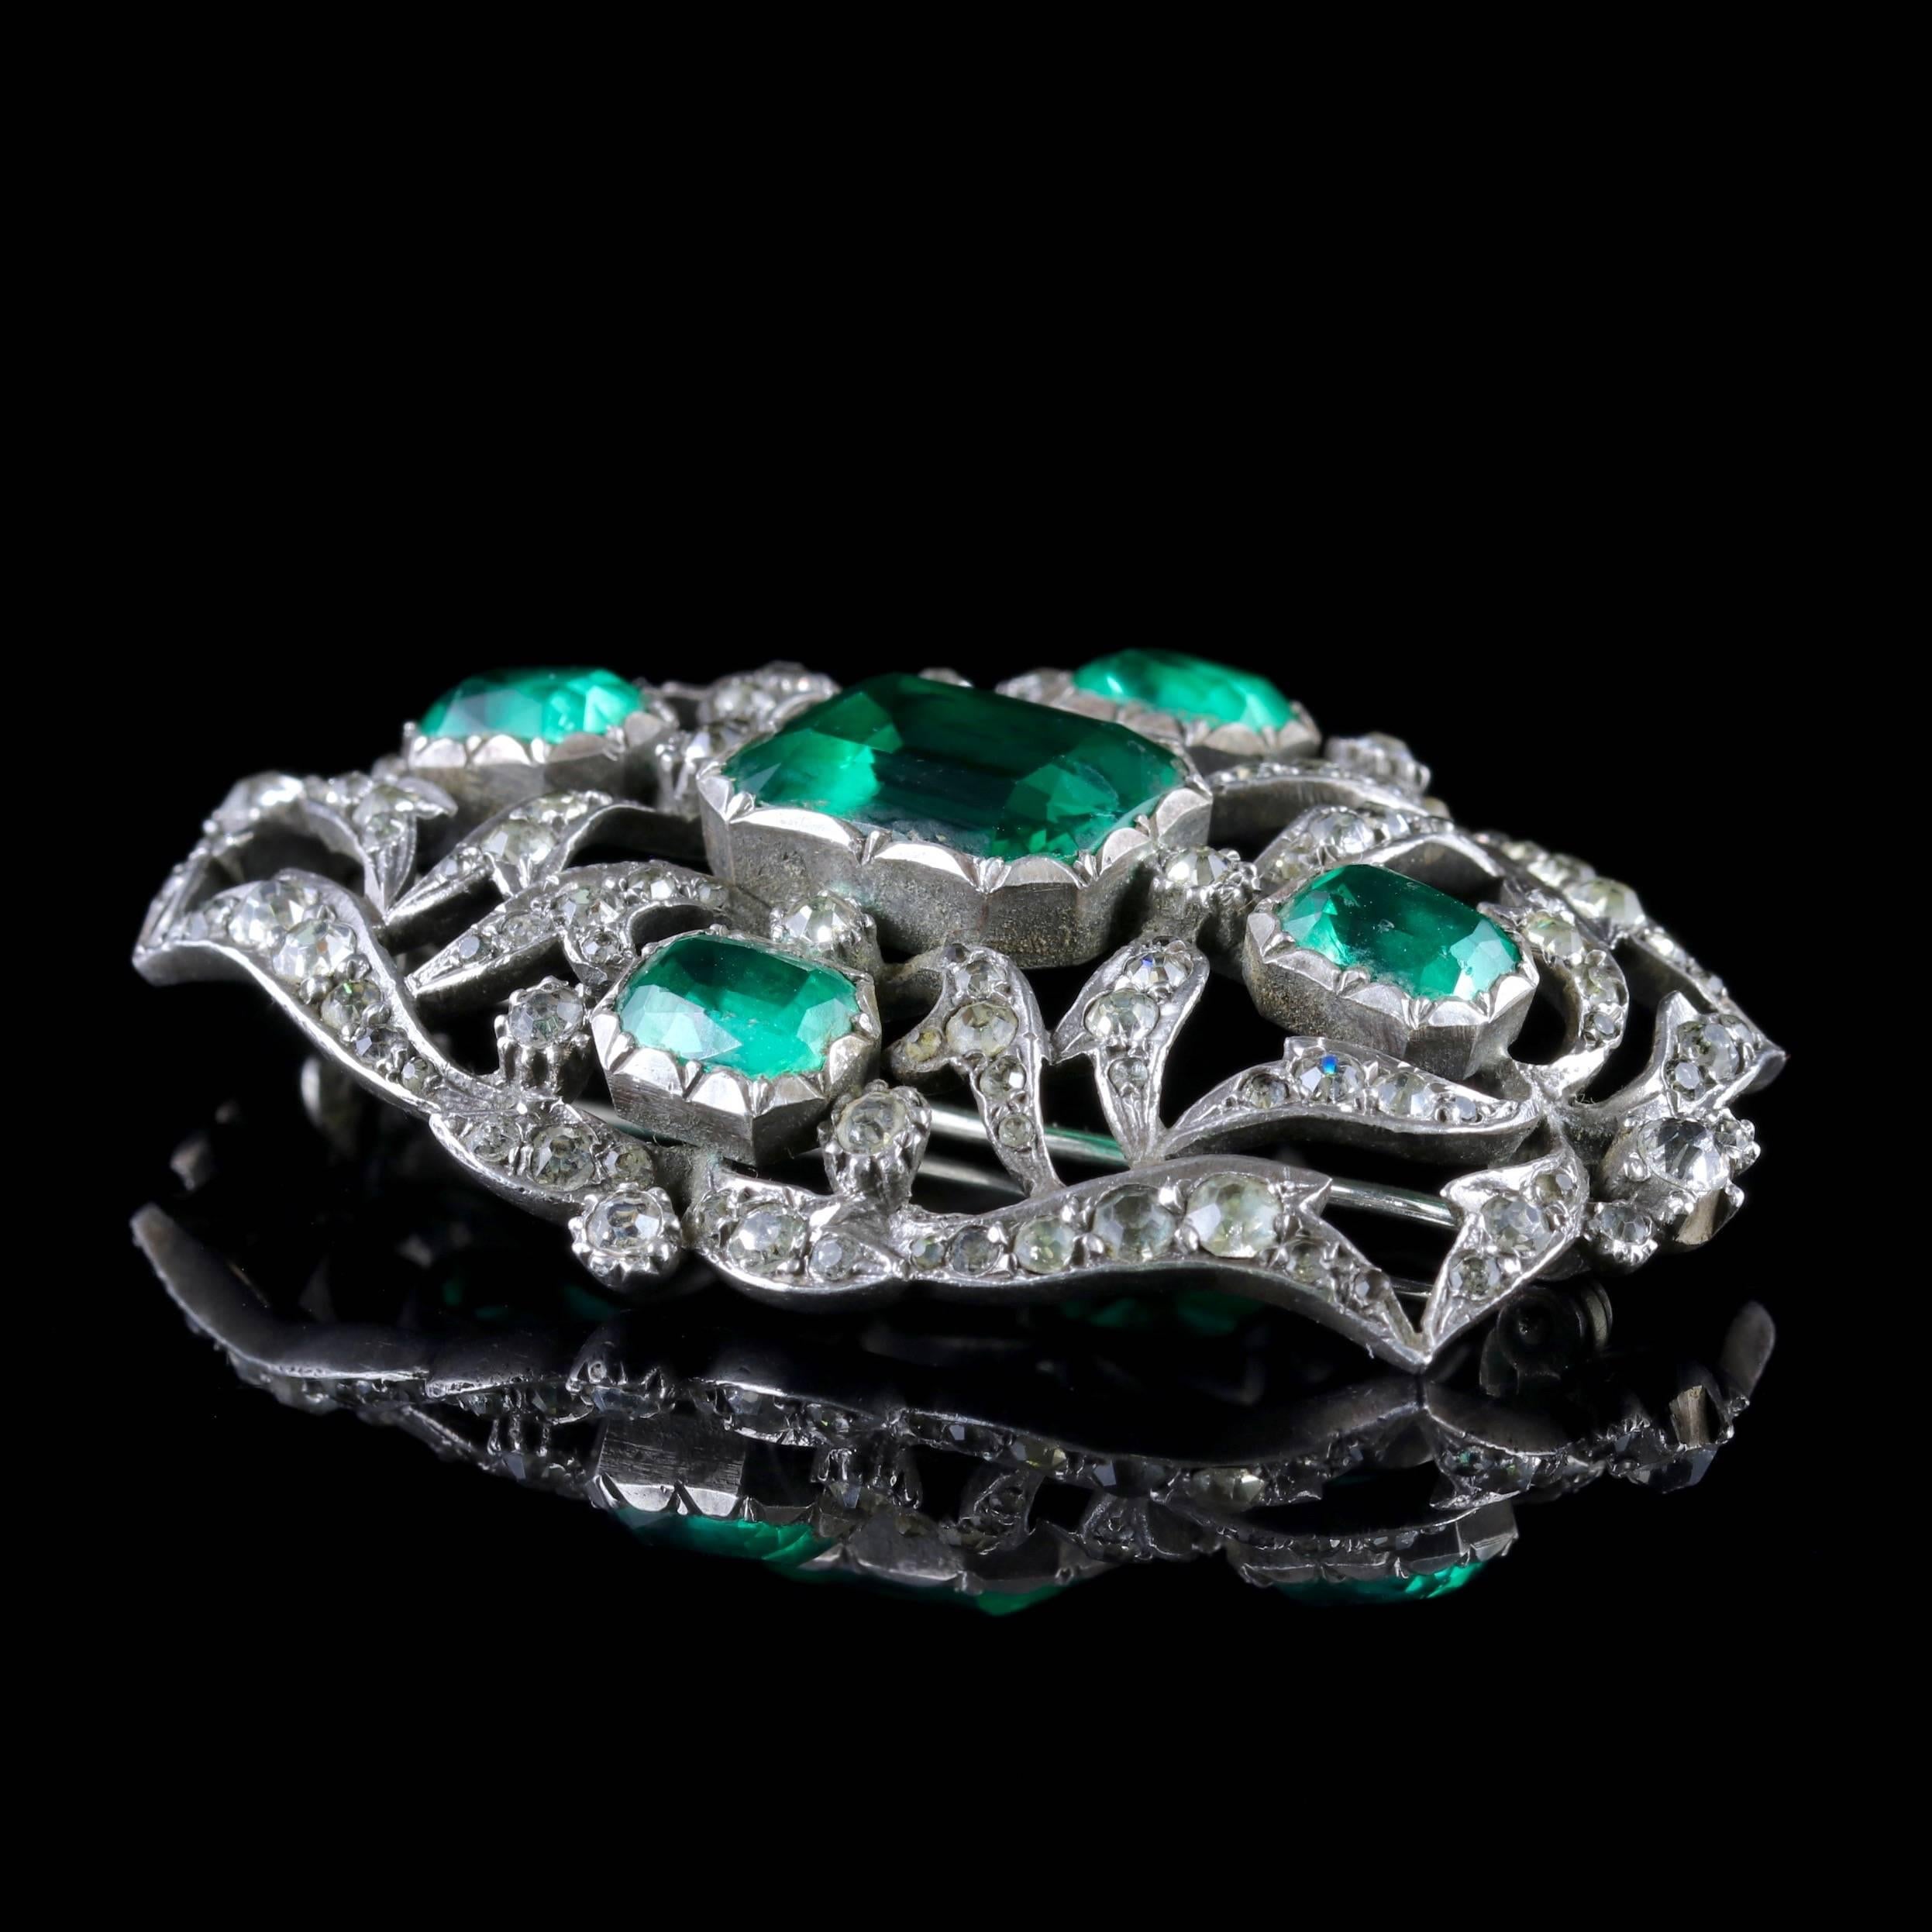 To read more please click continue reading below-

This fabulous Silver antique green Paste Stone brooch is Victorian Circa 1890.

The wonderful brooch is decorated in sparkling white Paste Stones with four fabulous green Pastes that simulate